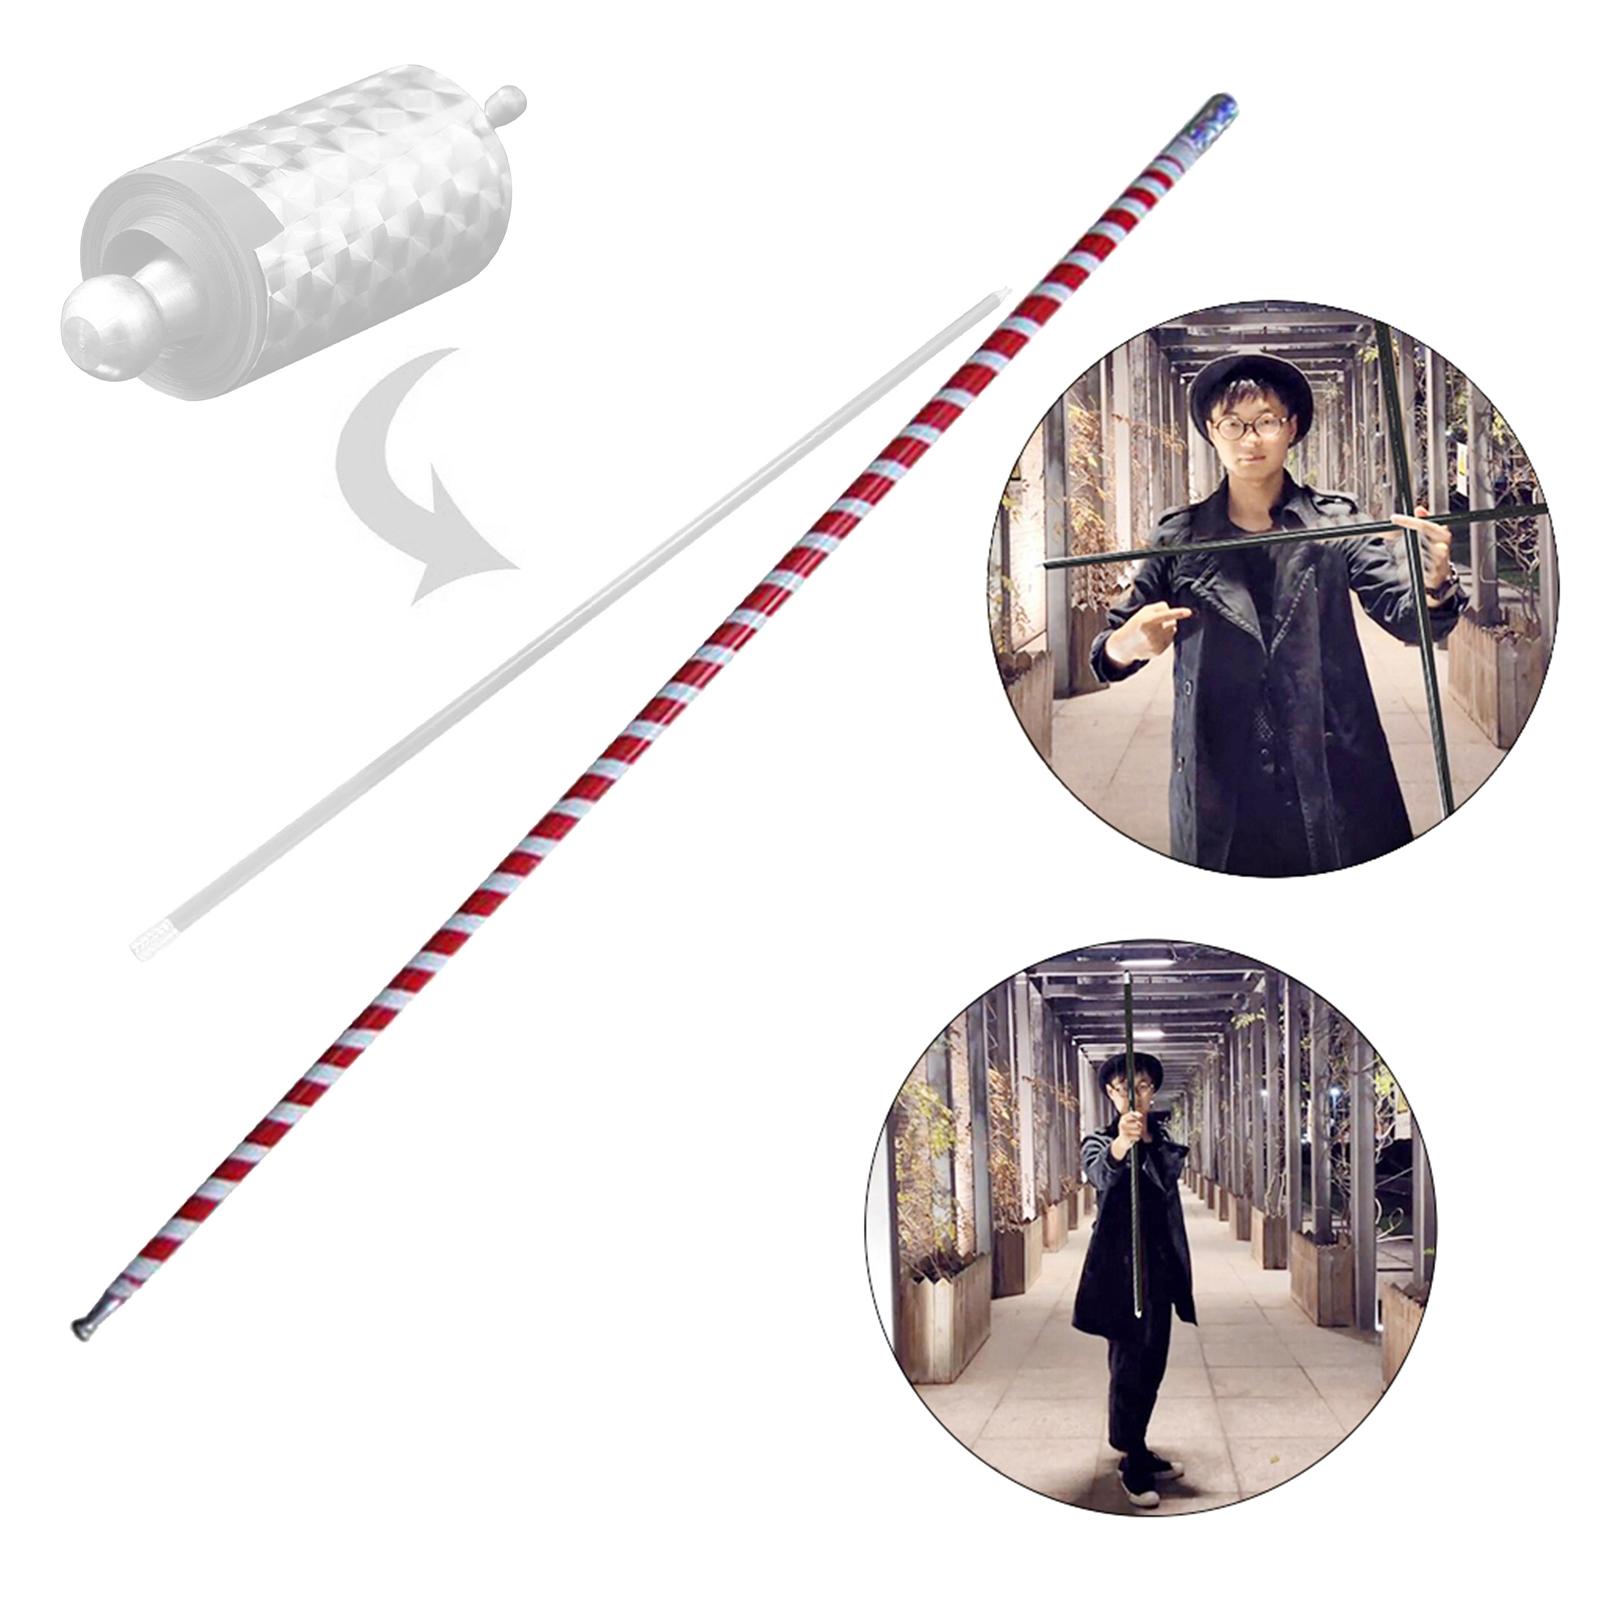 Portable Magical Pocket Staff Metal Outdoor Sport Magical Wand Rod Trick Toy Red White